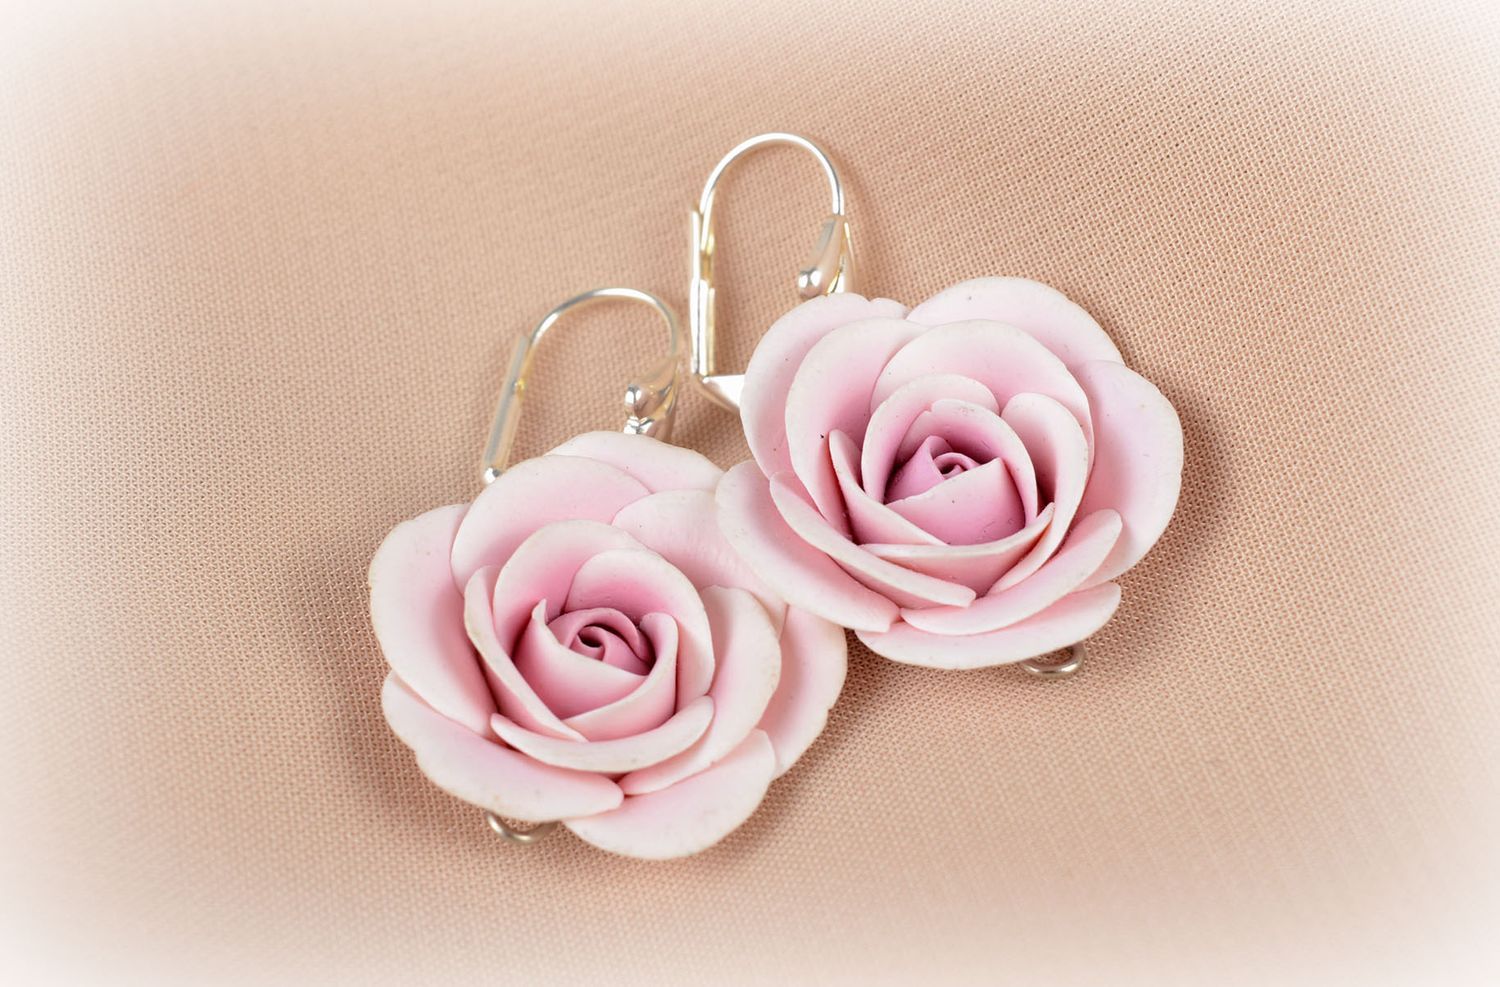 Handmade Polymer Clay Earrings, Floral Earrings, Dangle Earrings, White  Clay Earrings, Wood Earrings, Flowers, Gift for Her, Gift Idea